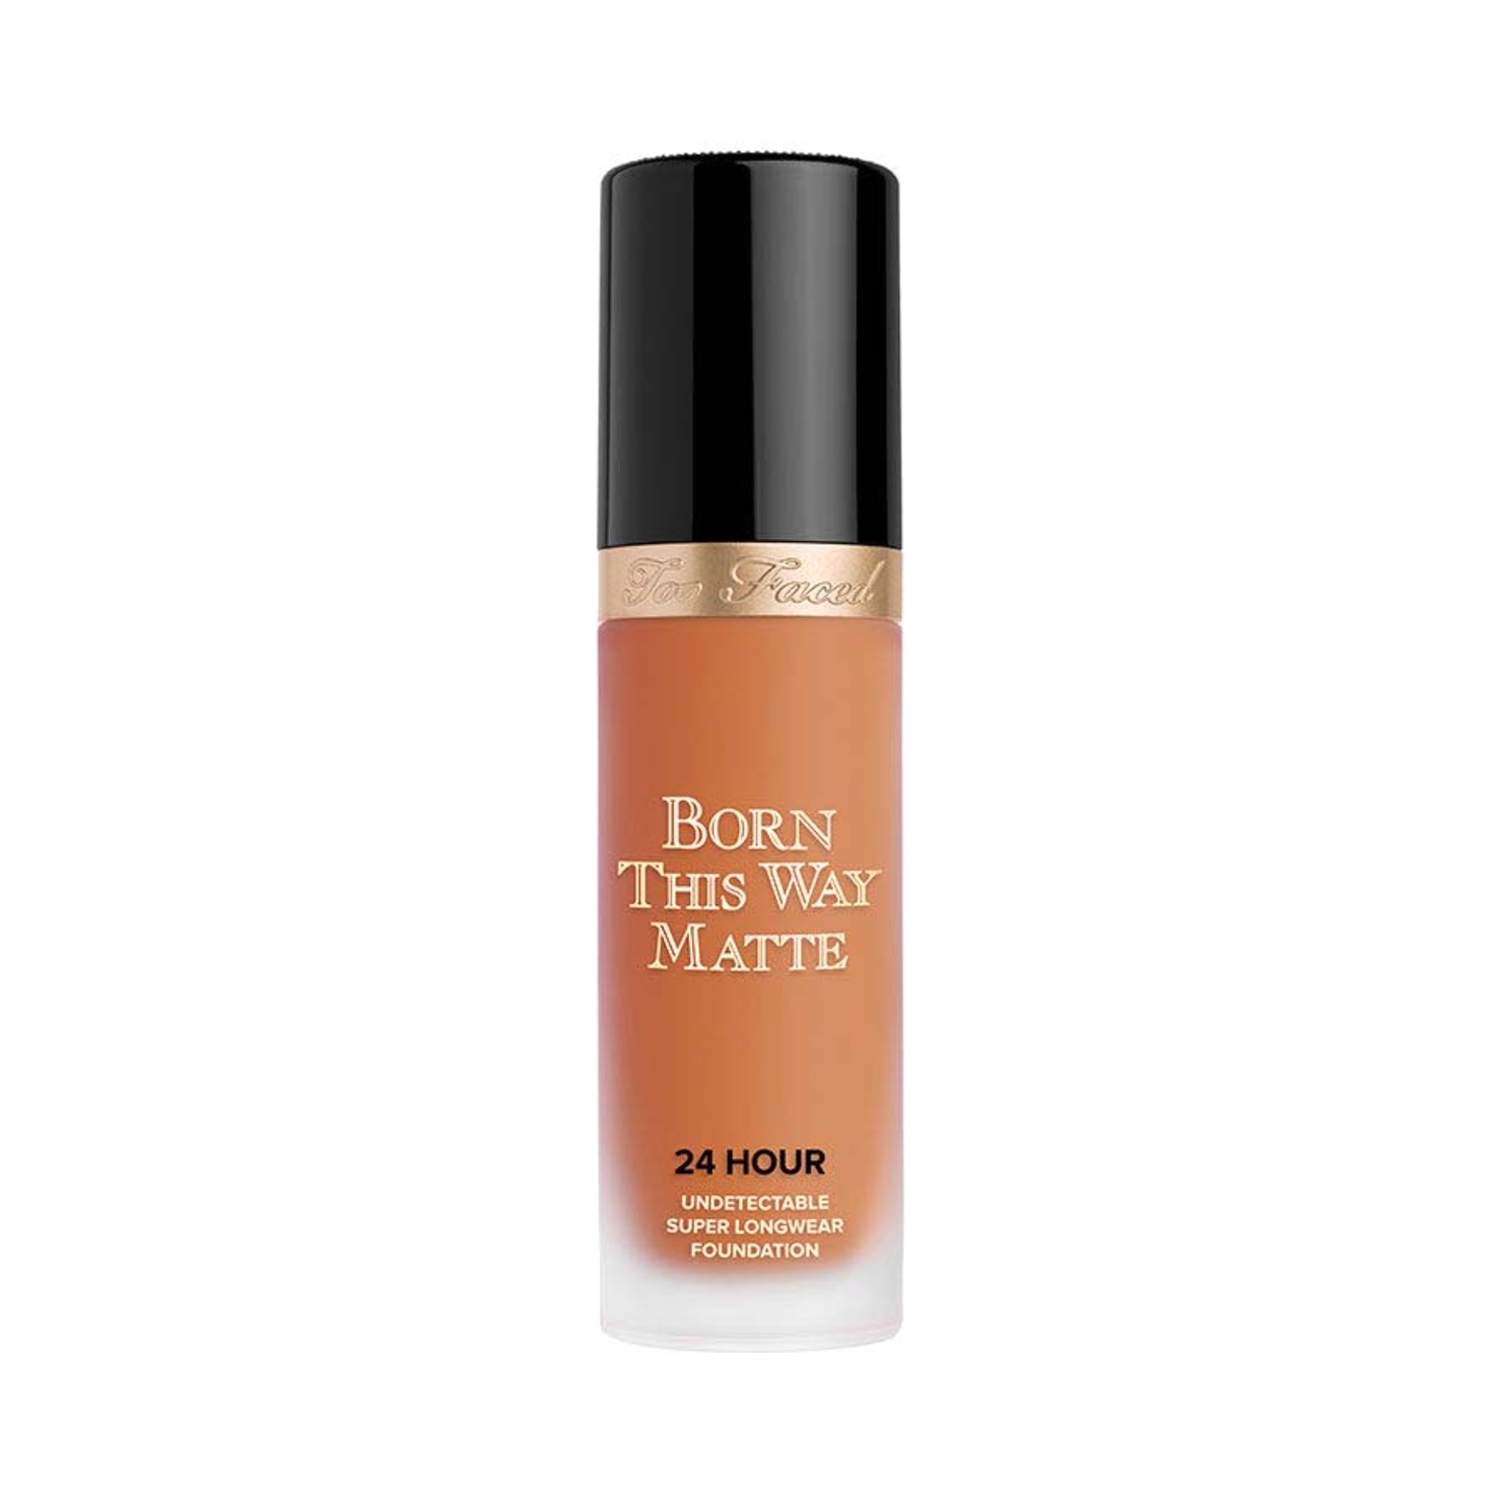 Too Faced | Too Faced Born This Way 24-Hour Longwear Matte Foundation - Mocha (30ml)